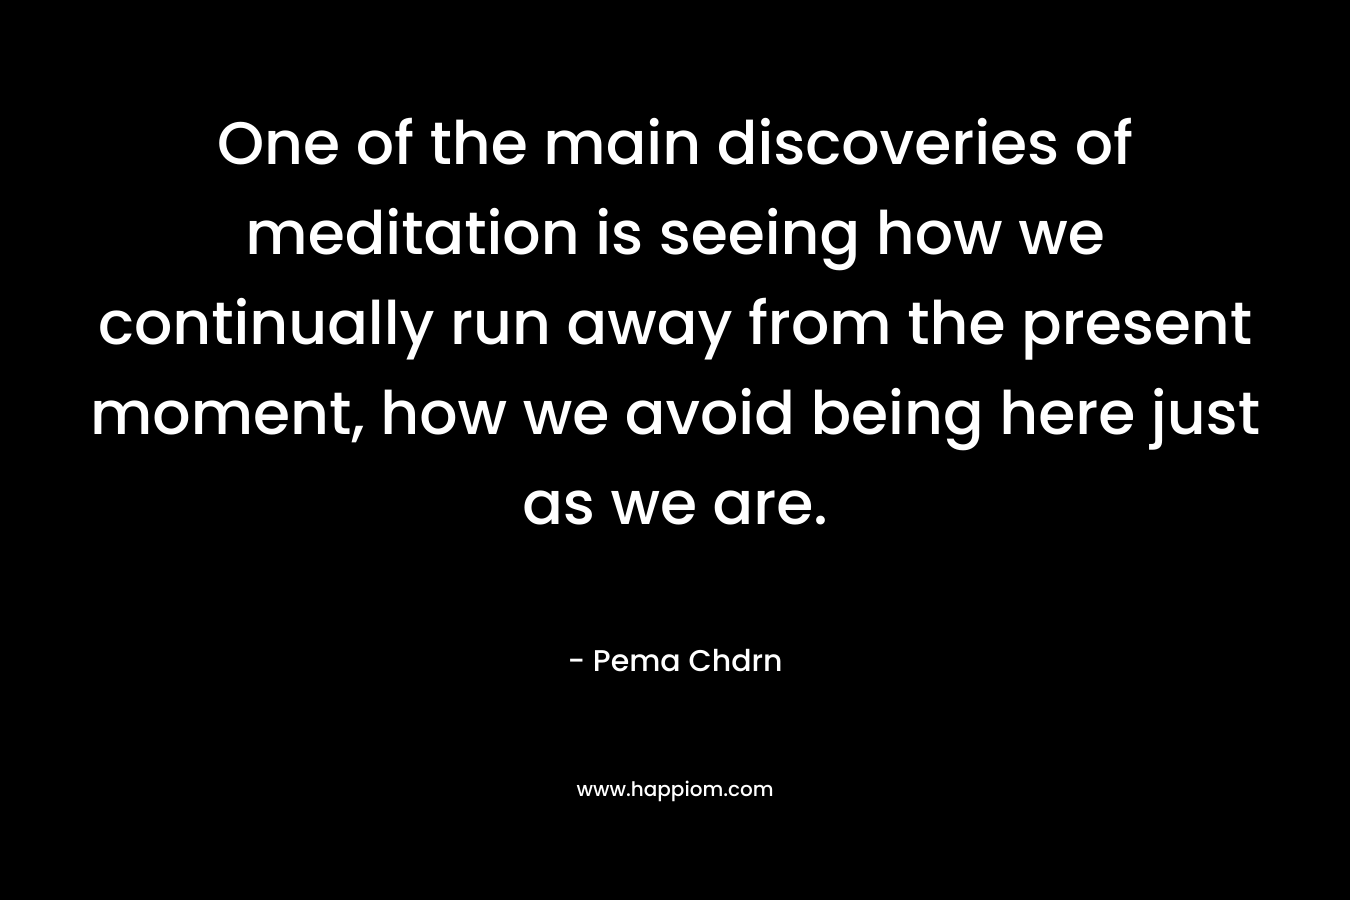 One of the main discoveries of meditation is seeing how we continually run away from the present moment, how we avoid being here just as we are.